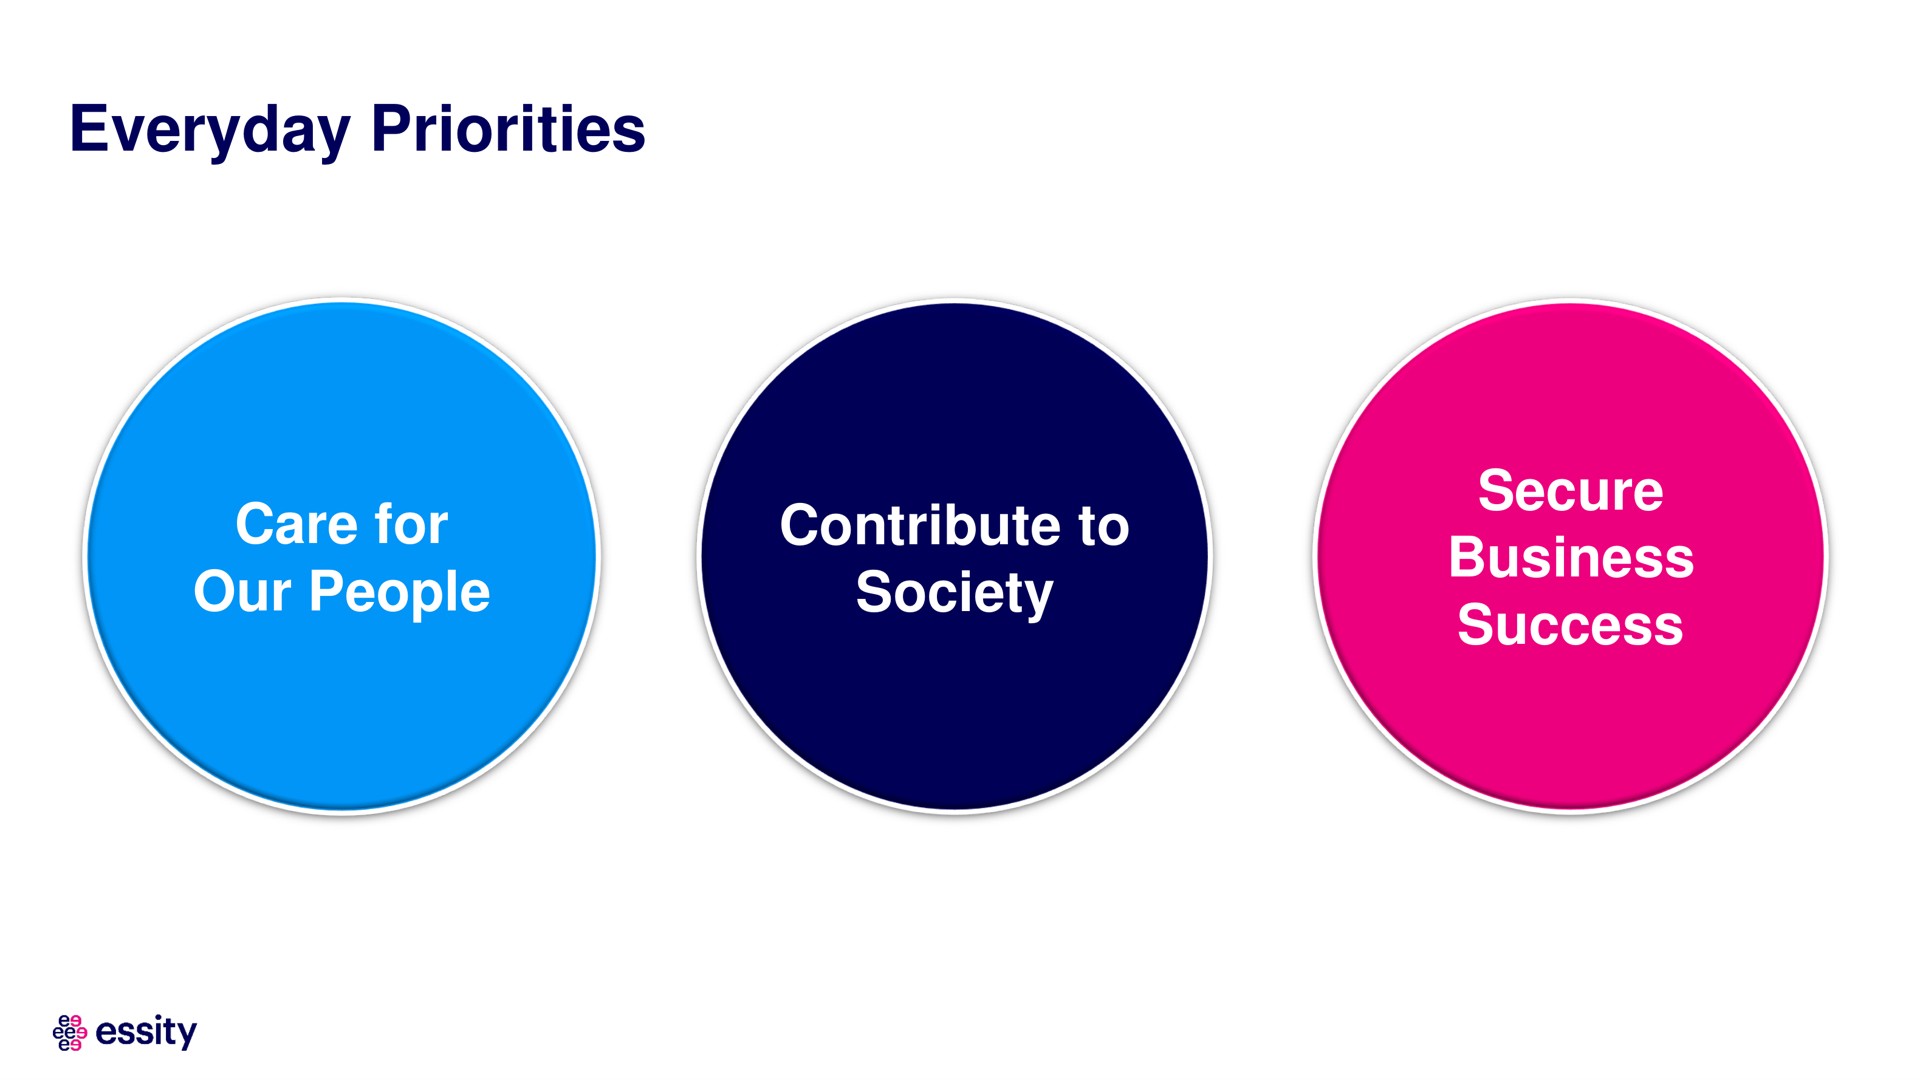 everyday priorities care for our people contribute to society secure business success | Essity